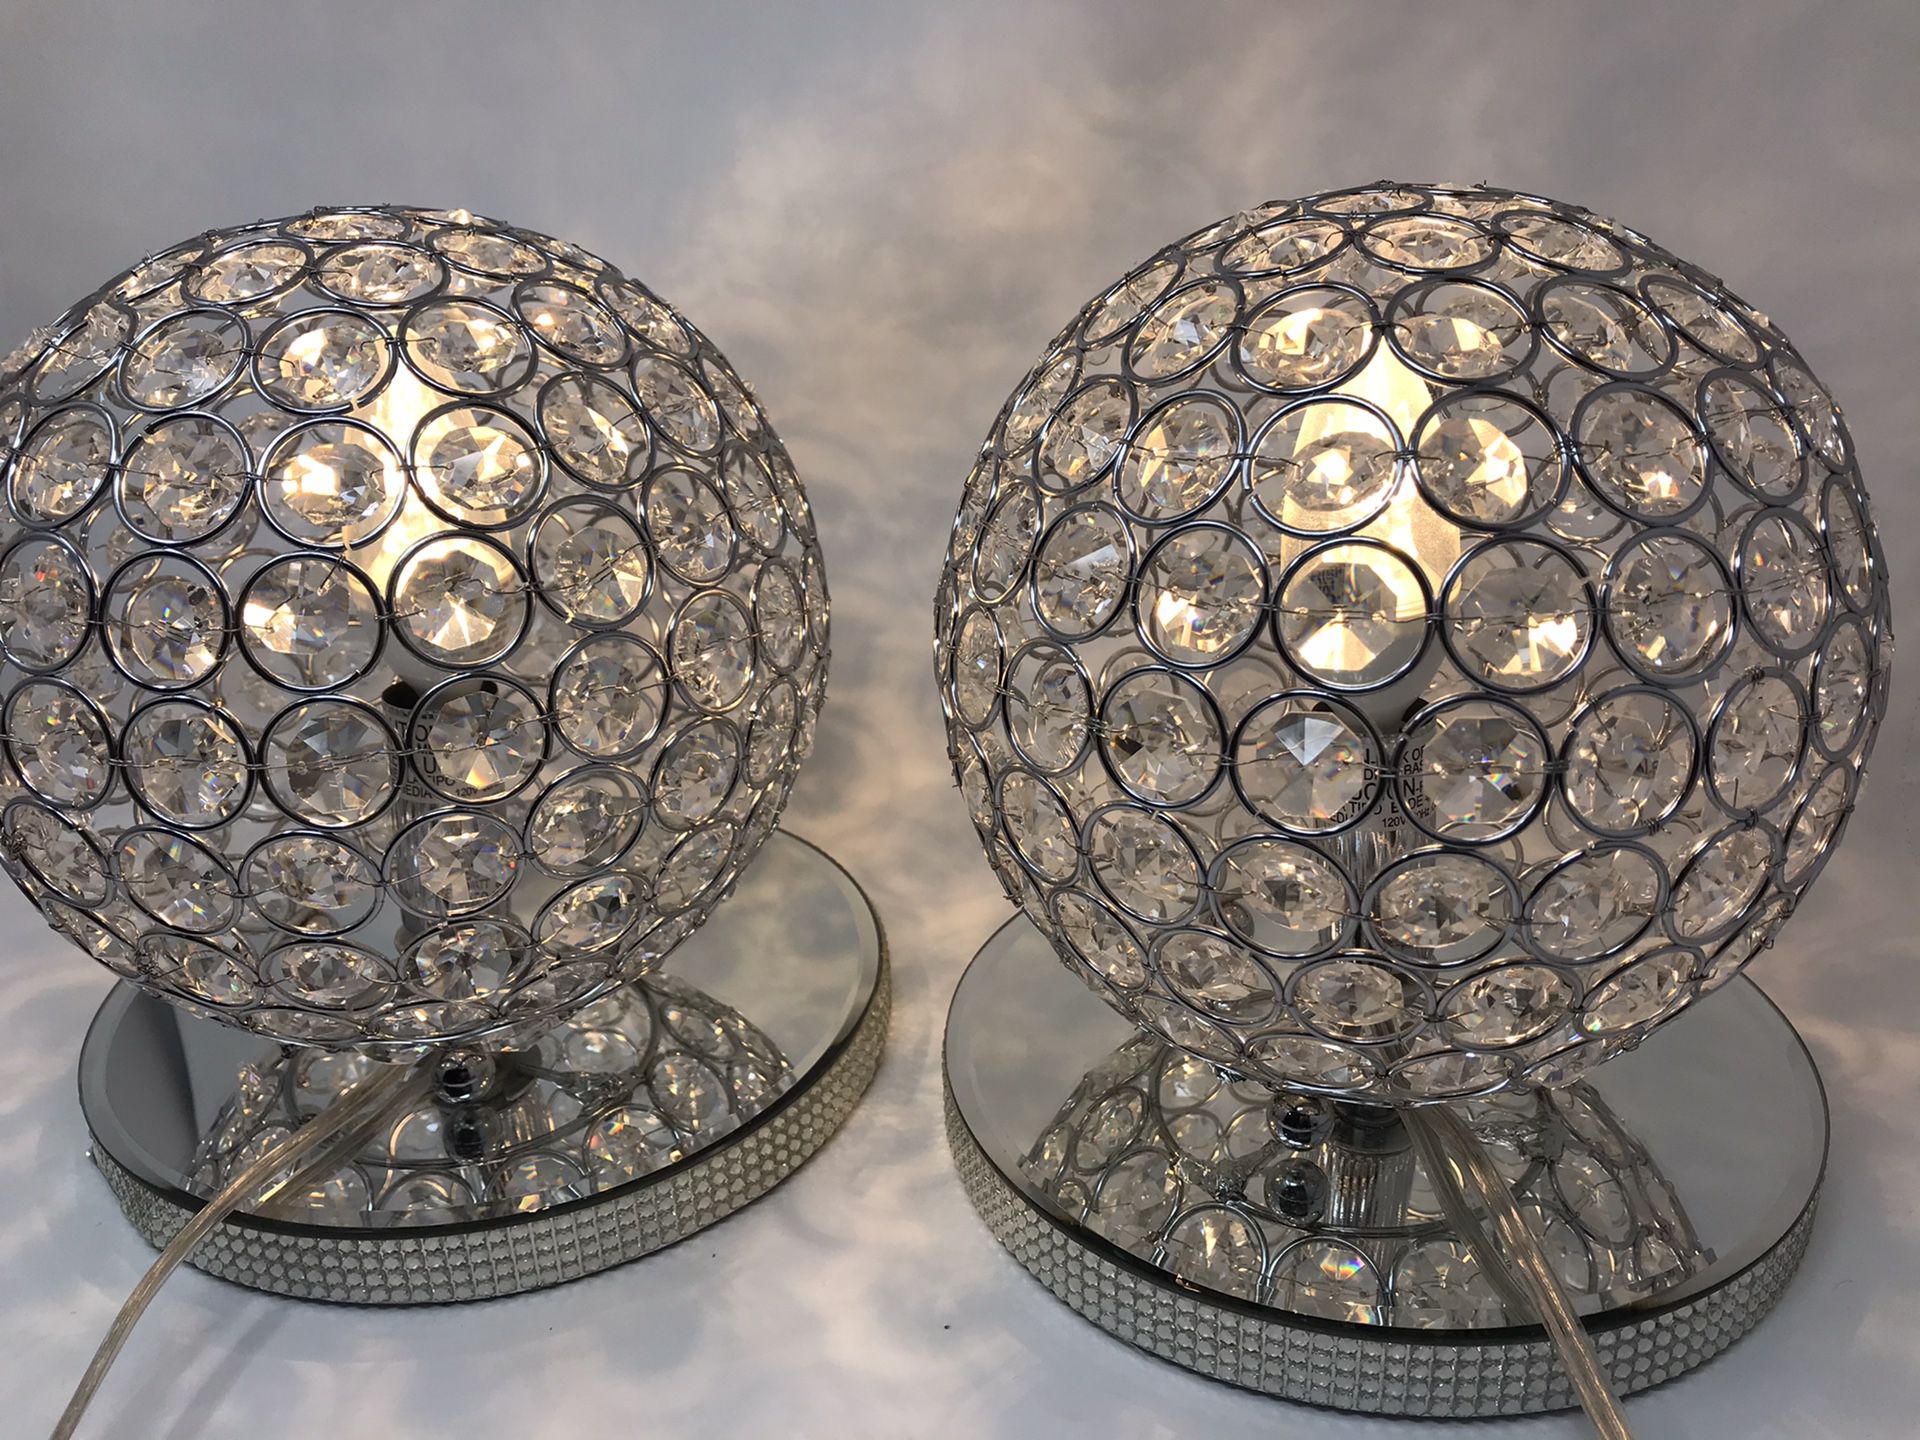 Crystal Balls Chandeliers stand